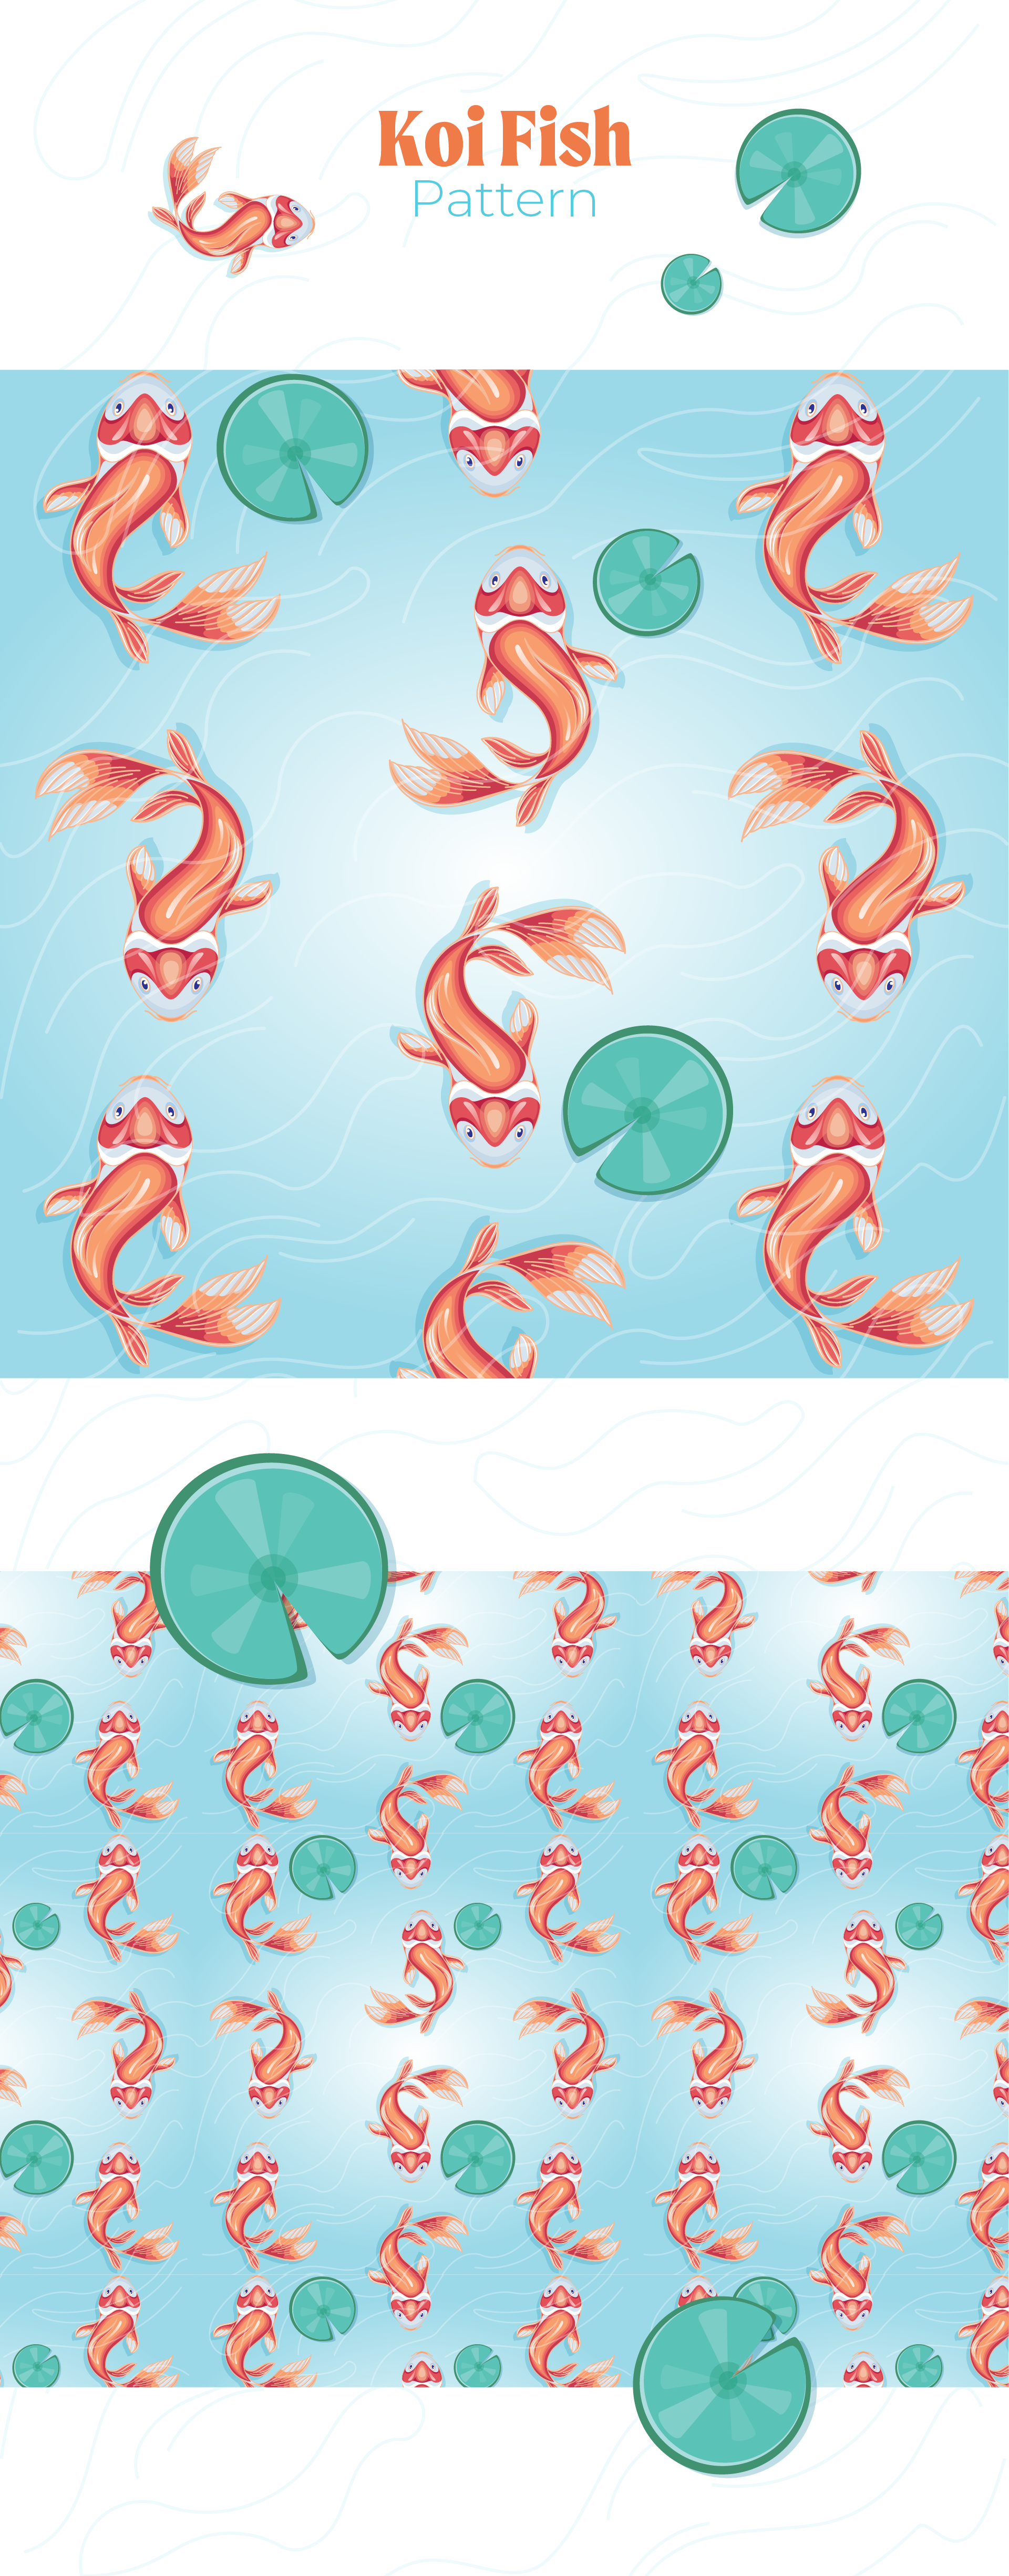 Illustration of an orange koi fish and lilly pads repeated in a pattern over water.